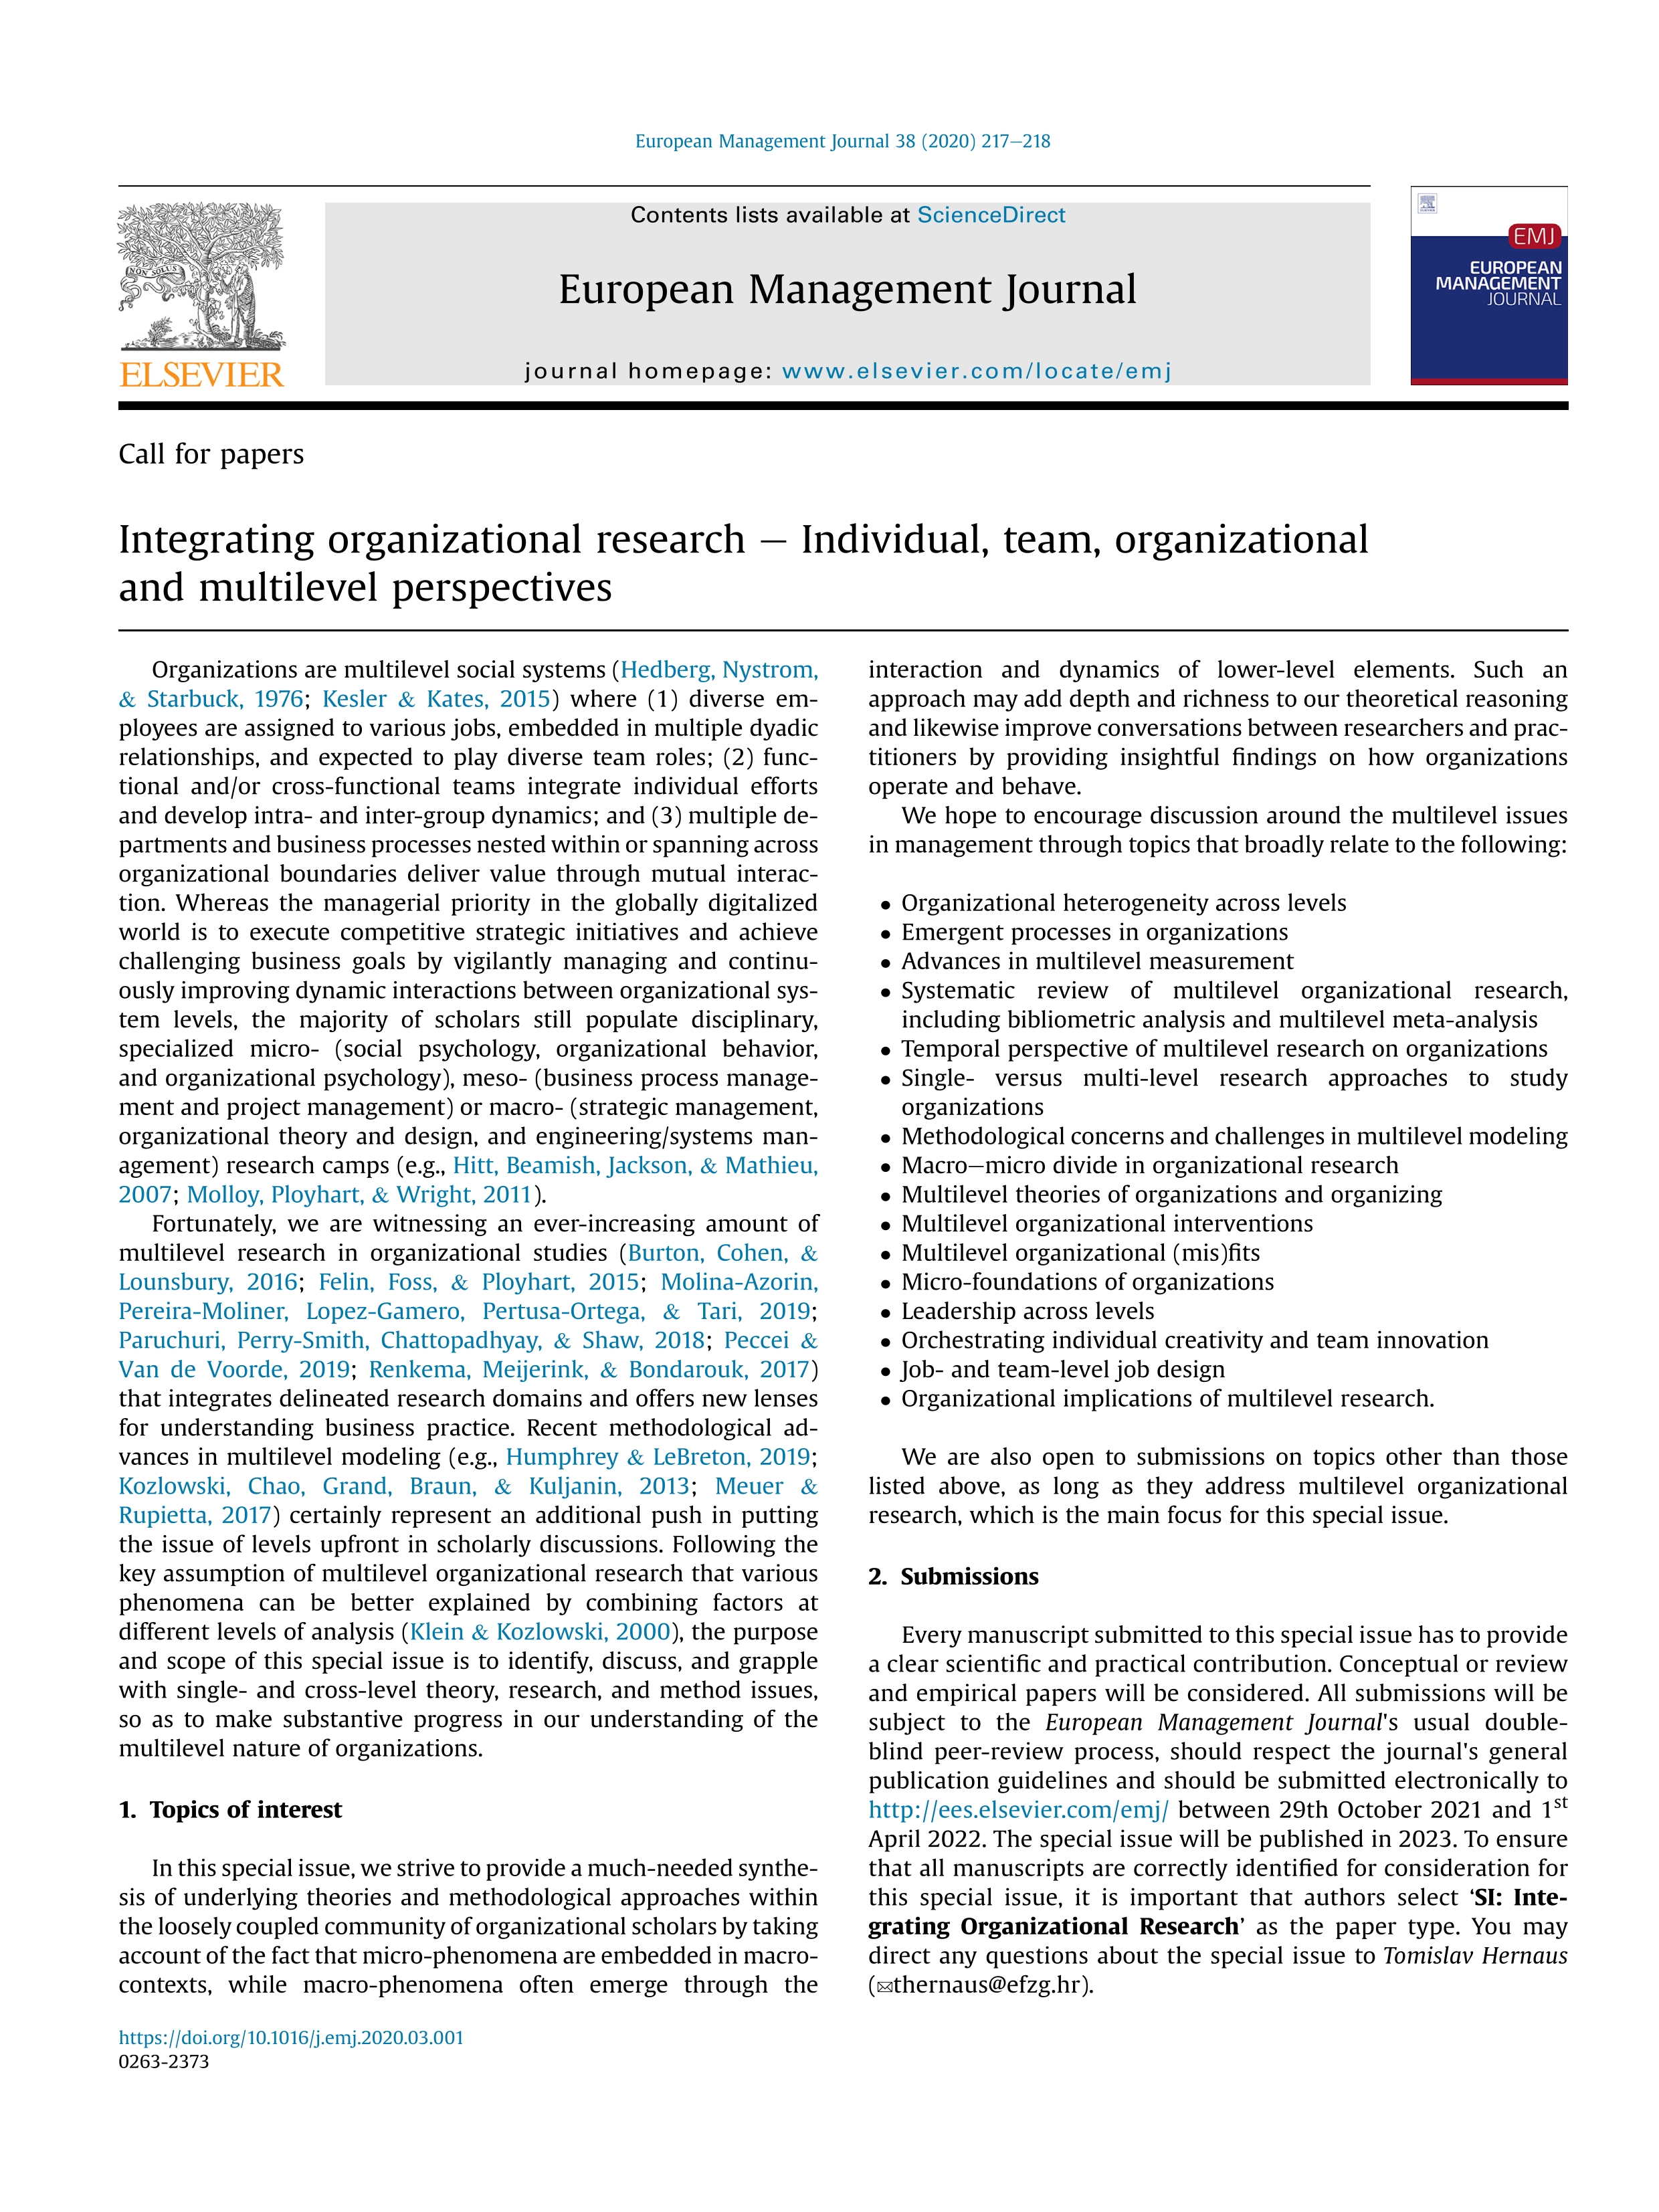 Integrating organizational research–Individual, team, organizational and multilevel perspectives